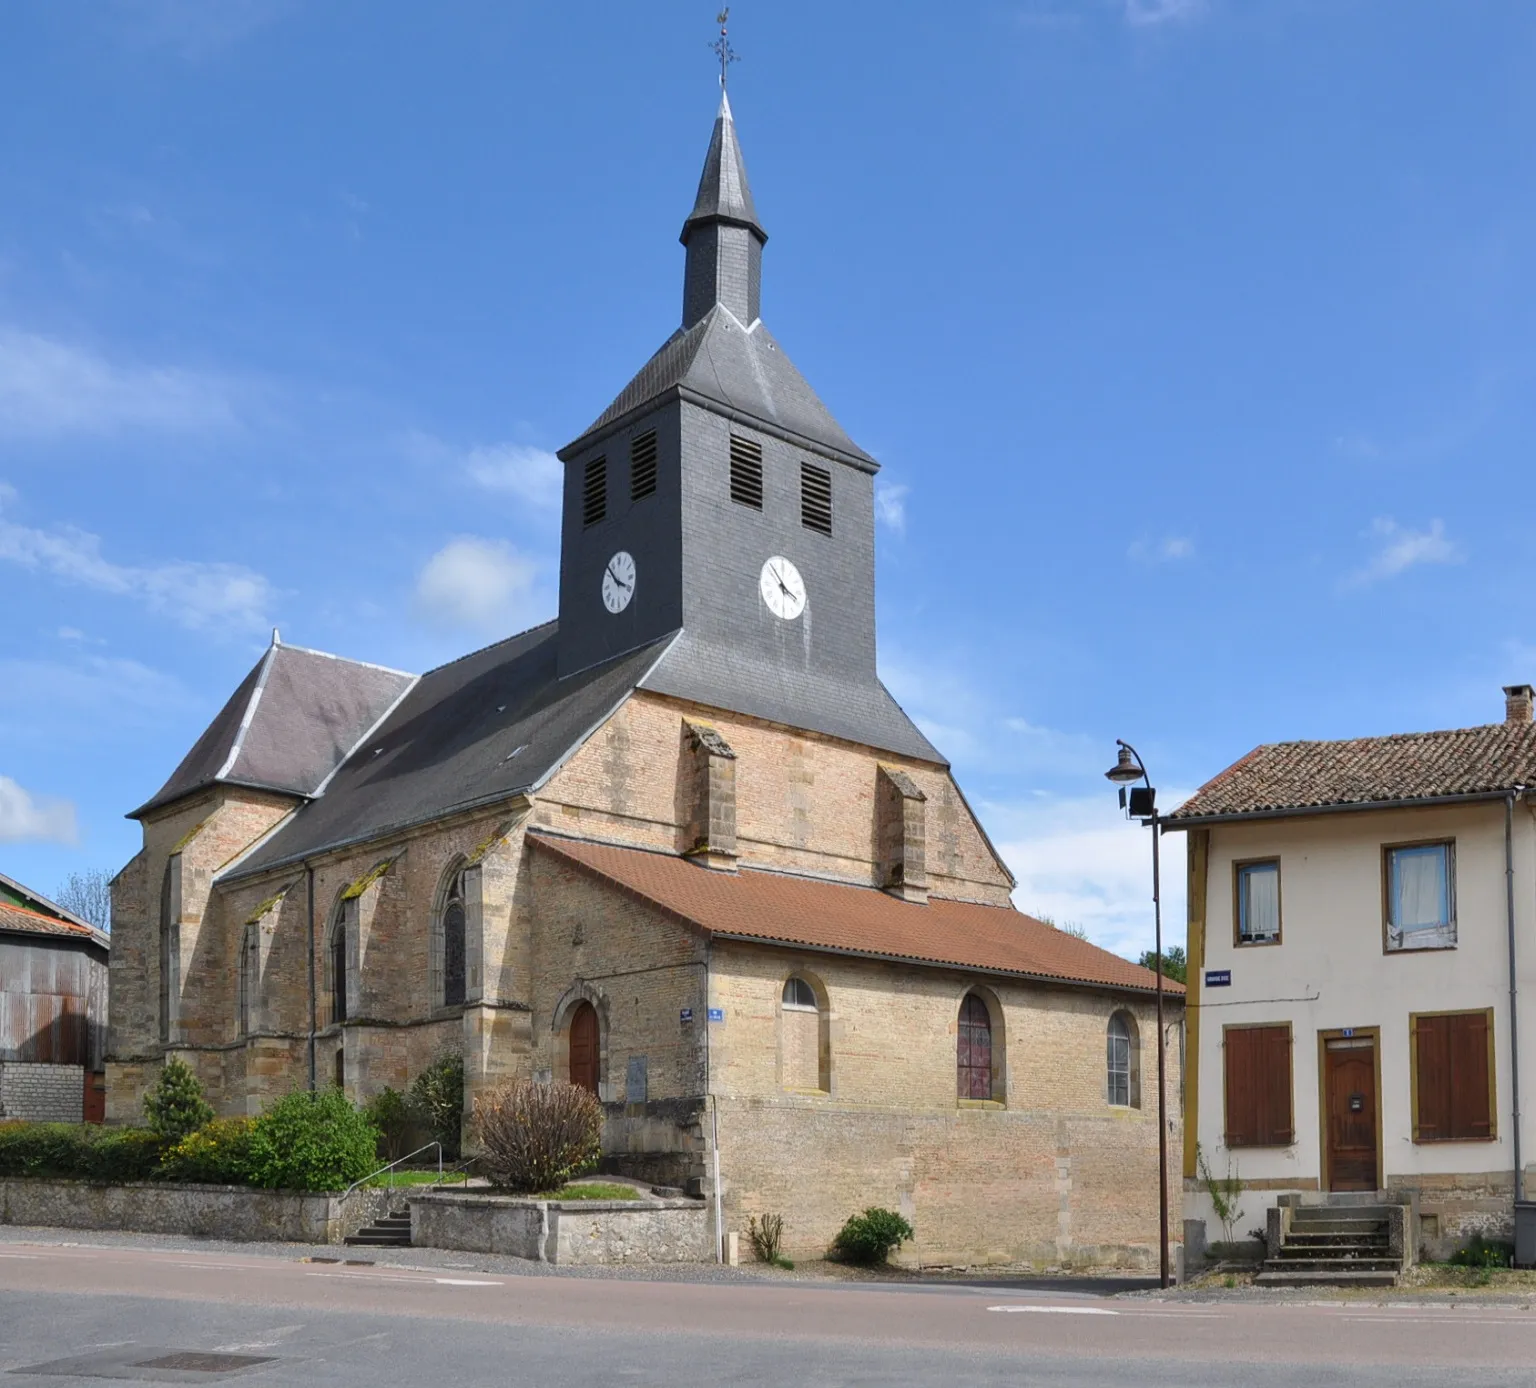 Photo showing: The Church of the Exaltation of the Holy Cross in Passavant-en-Argonne (Marne department, Champagne-Ardenne region, France).